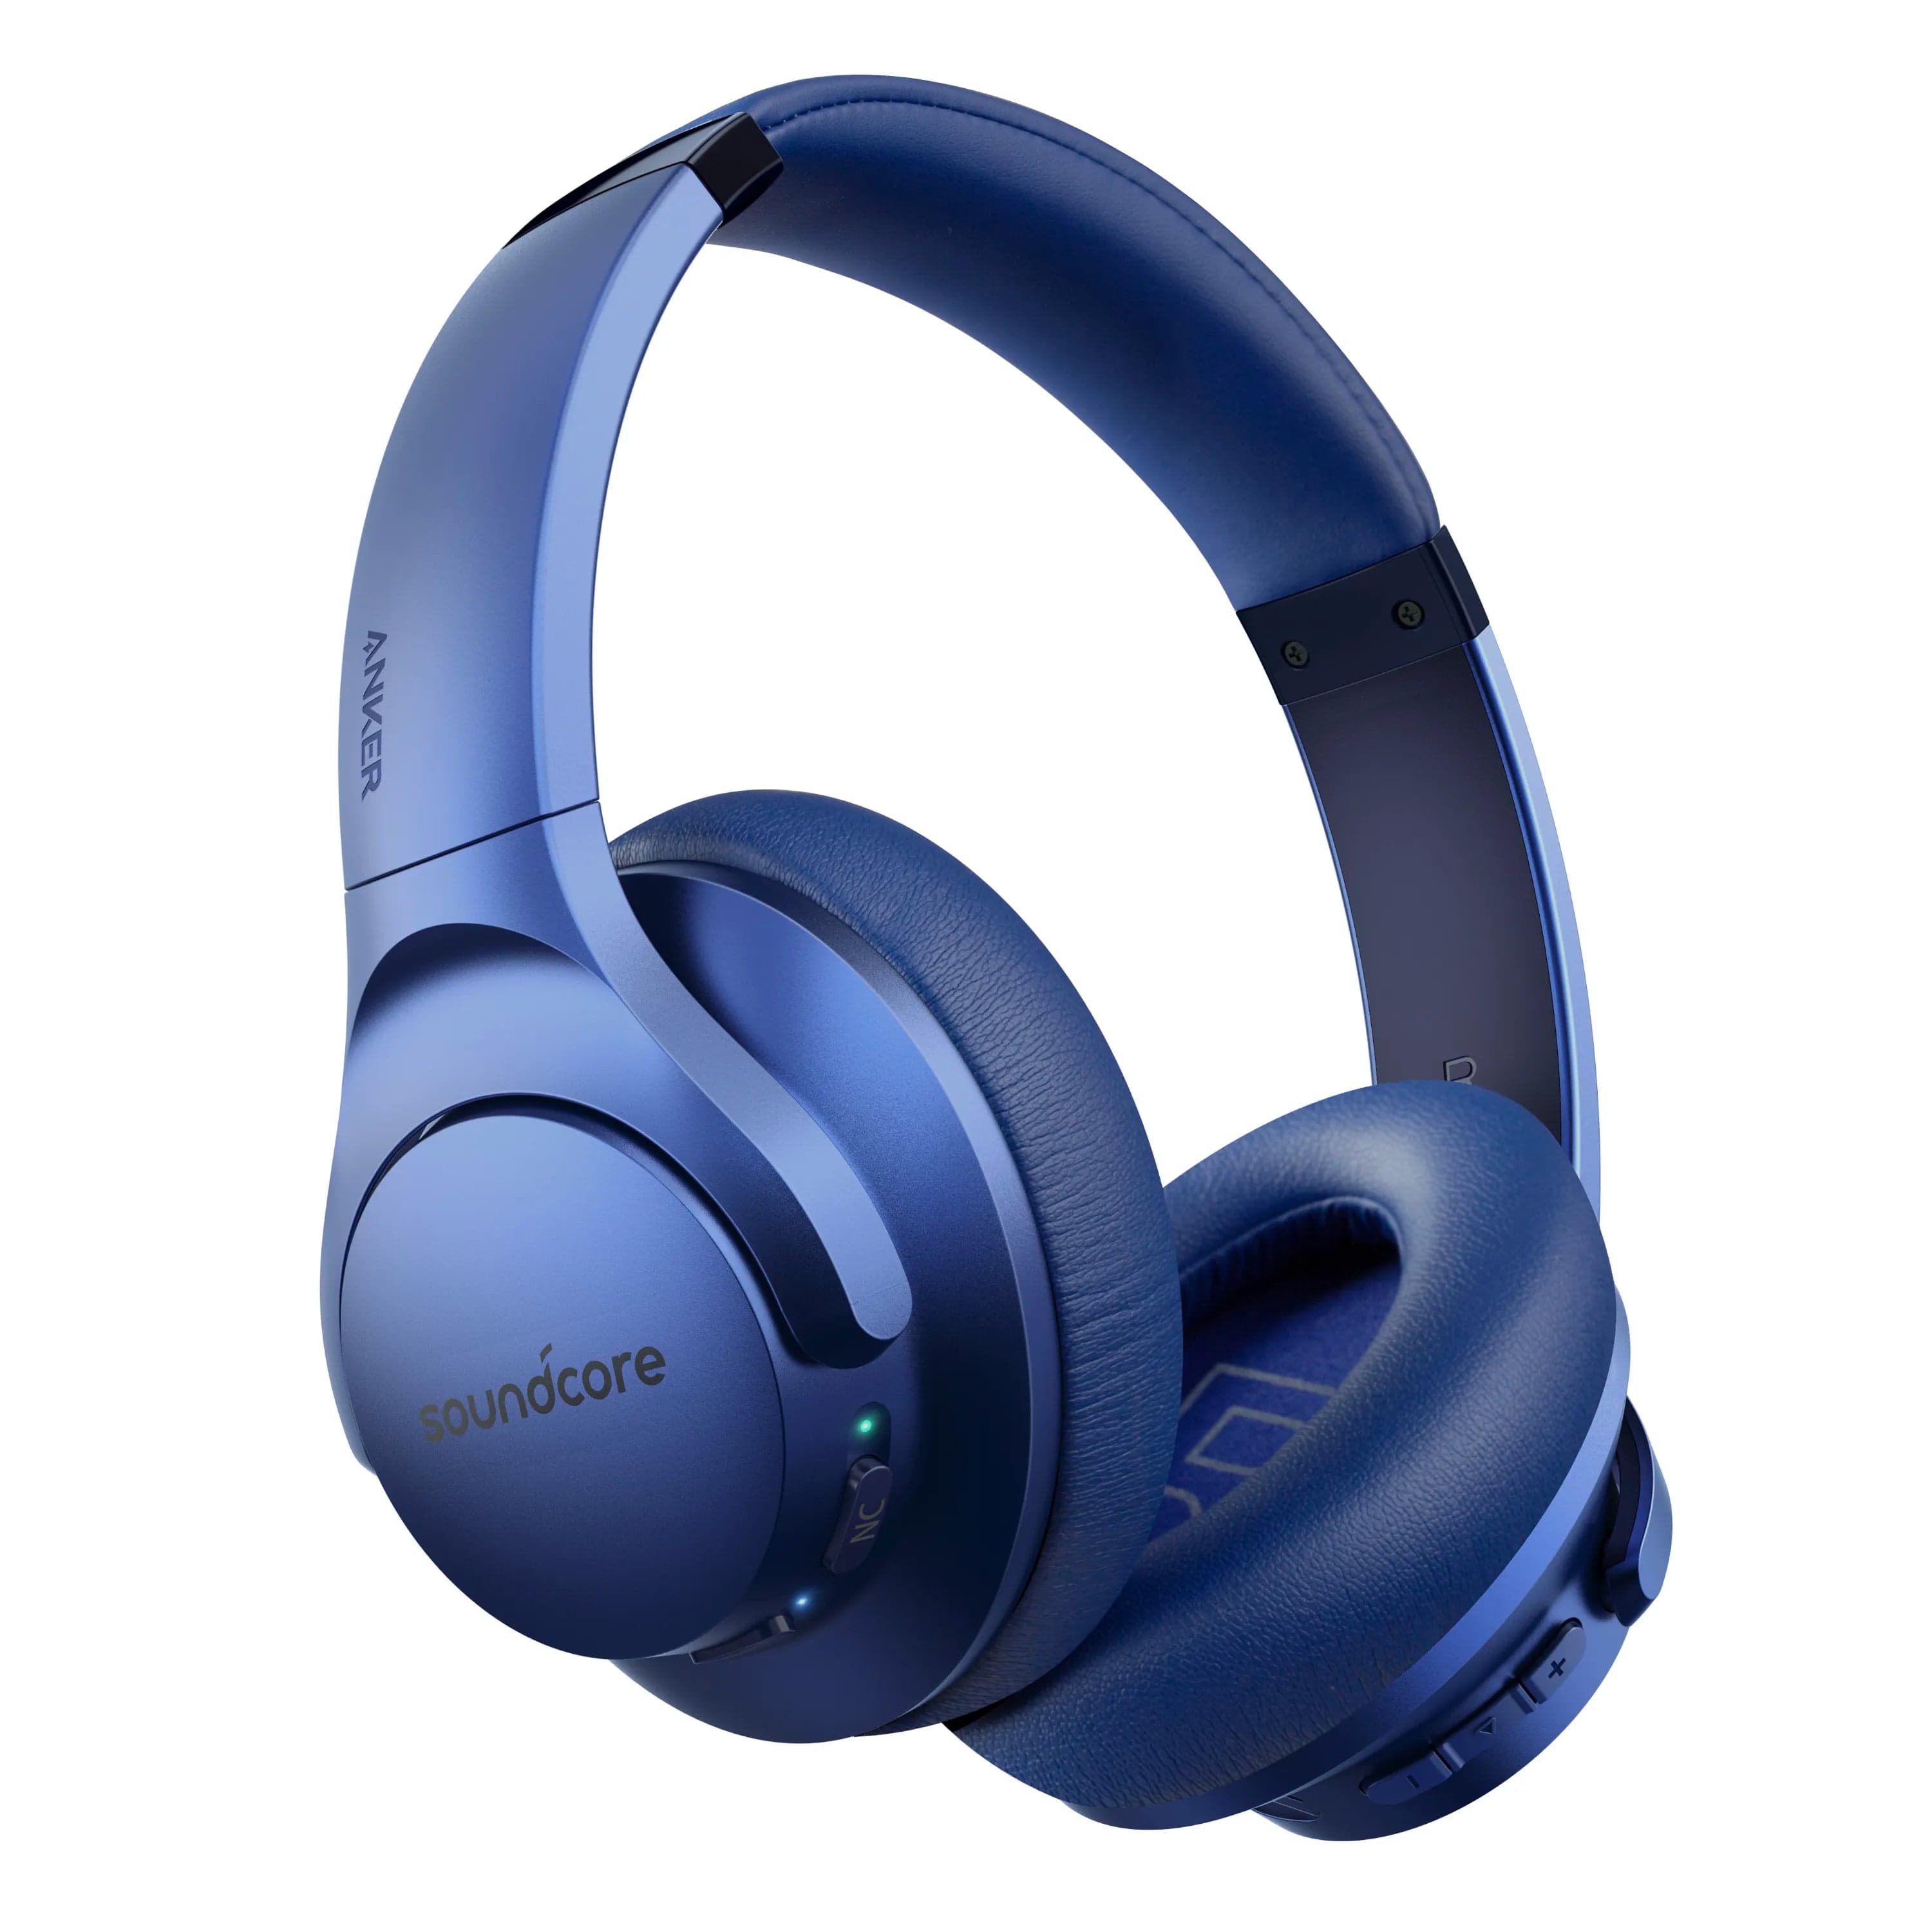 Soundcore Blue / China Soundcore, Wireless Over Ear, Version Life Q20, Supports Bluetooth 5.0, Playtime up to 40 Hours, Color Blue